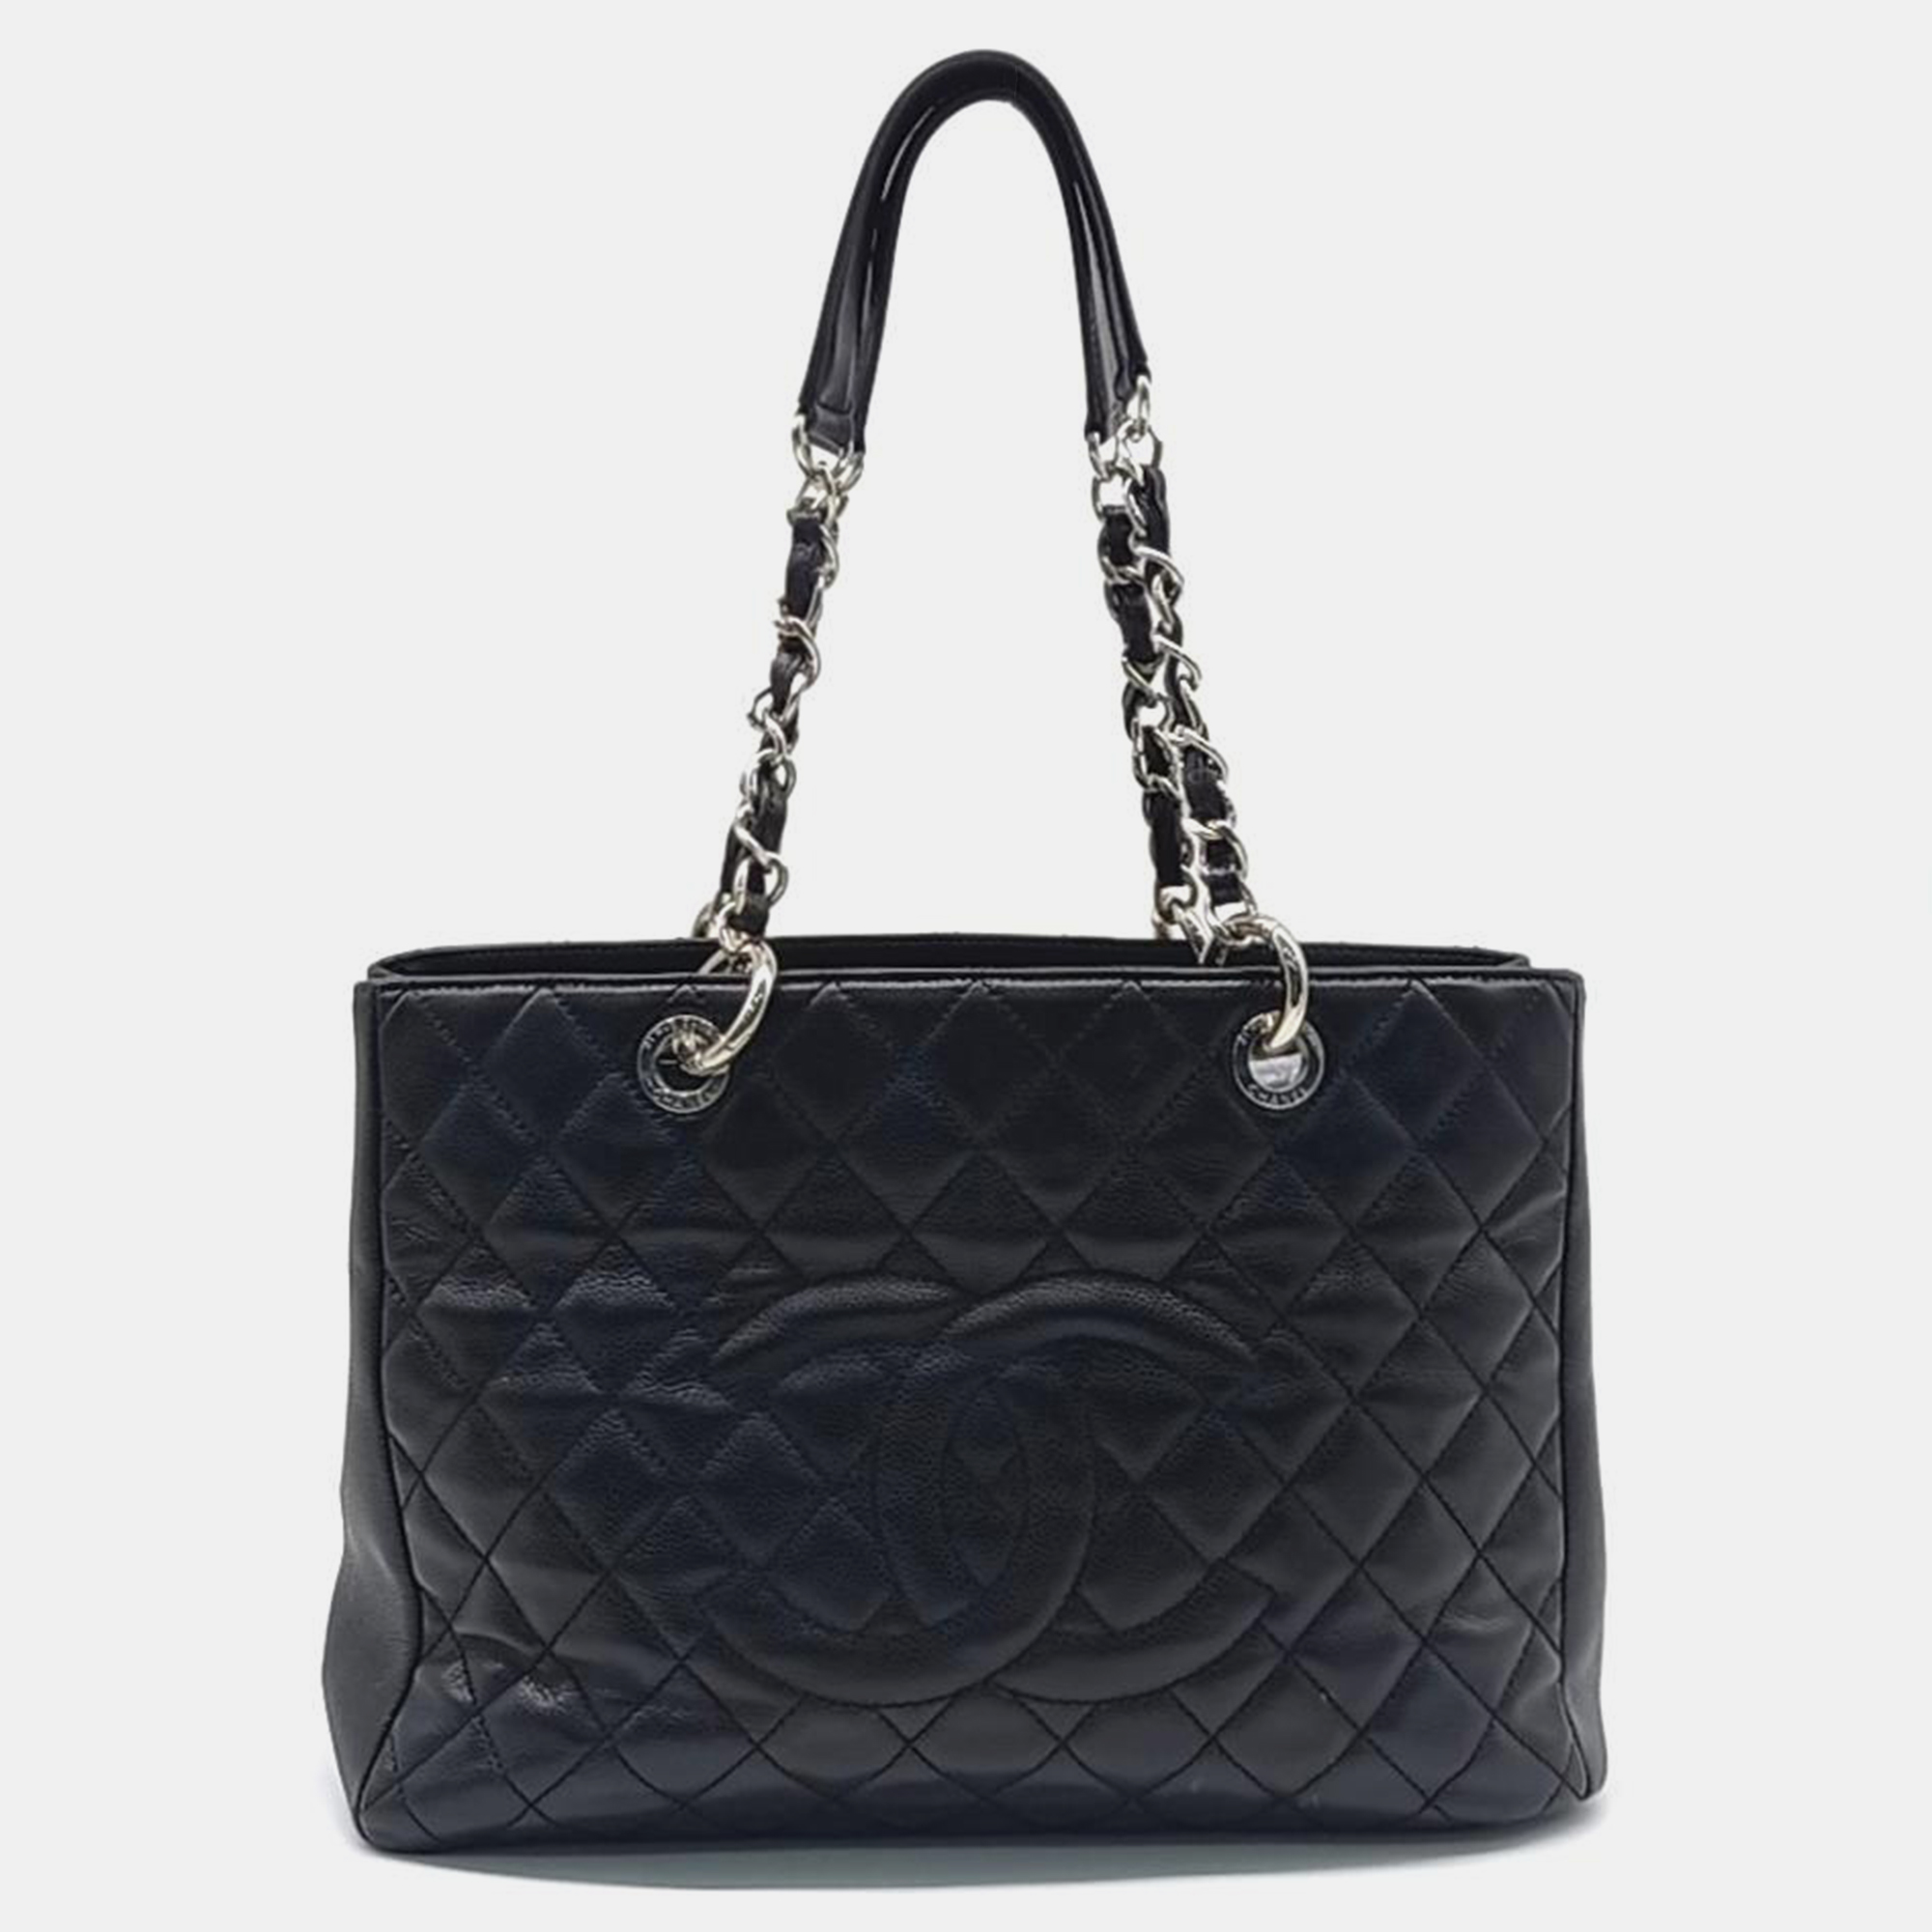 Chanel black caviar leather grand shopping tote bag